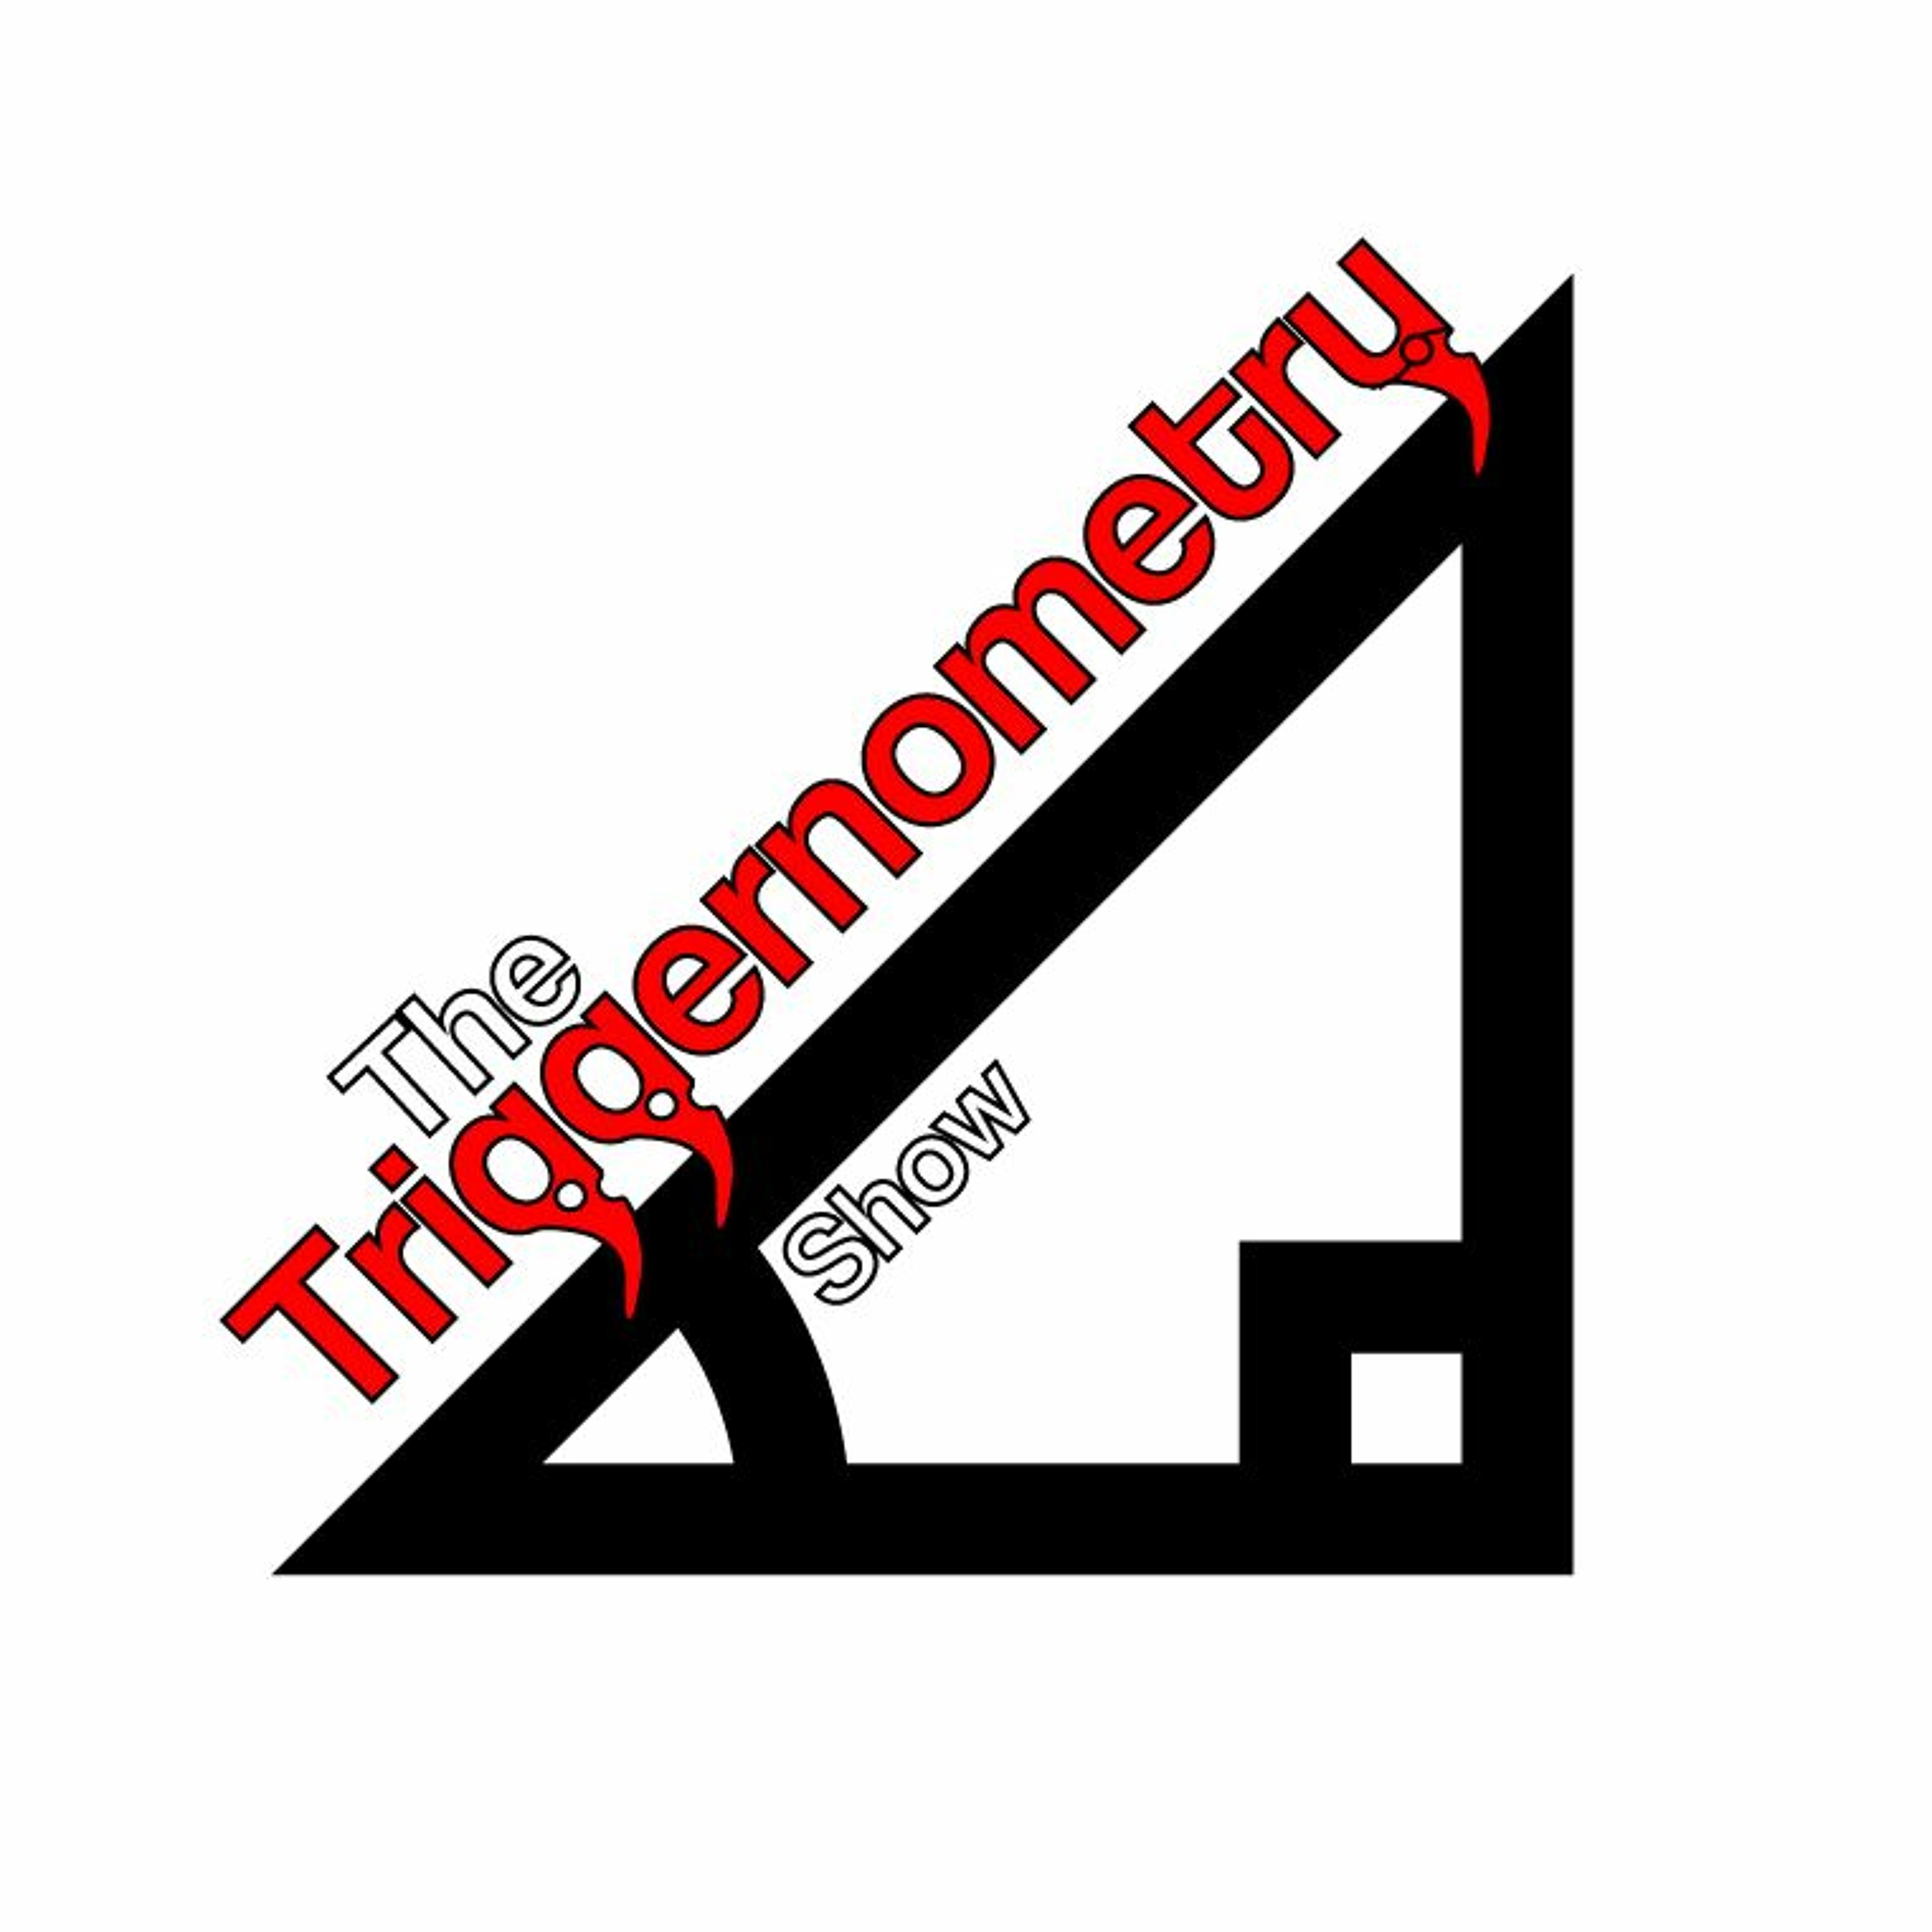 The Triggernometry Show - Thomas Haugland - THLR - The man, the legend, the Norway.